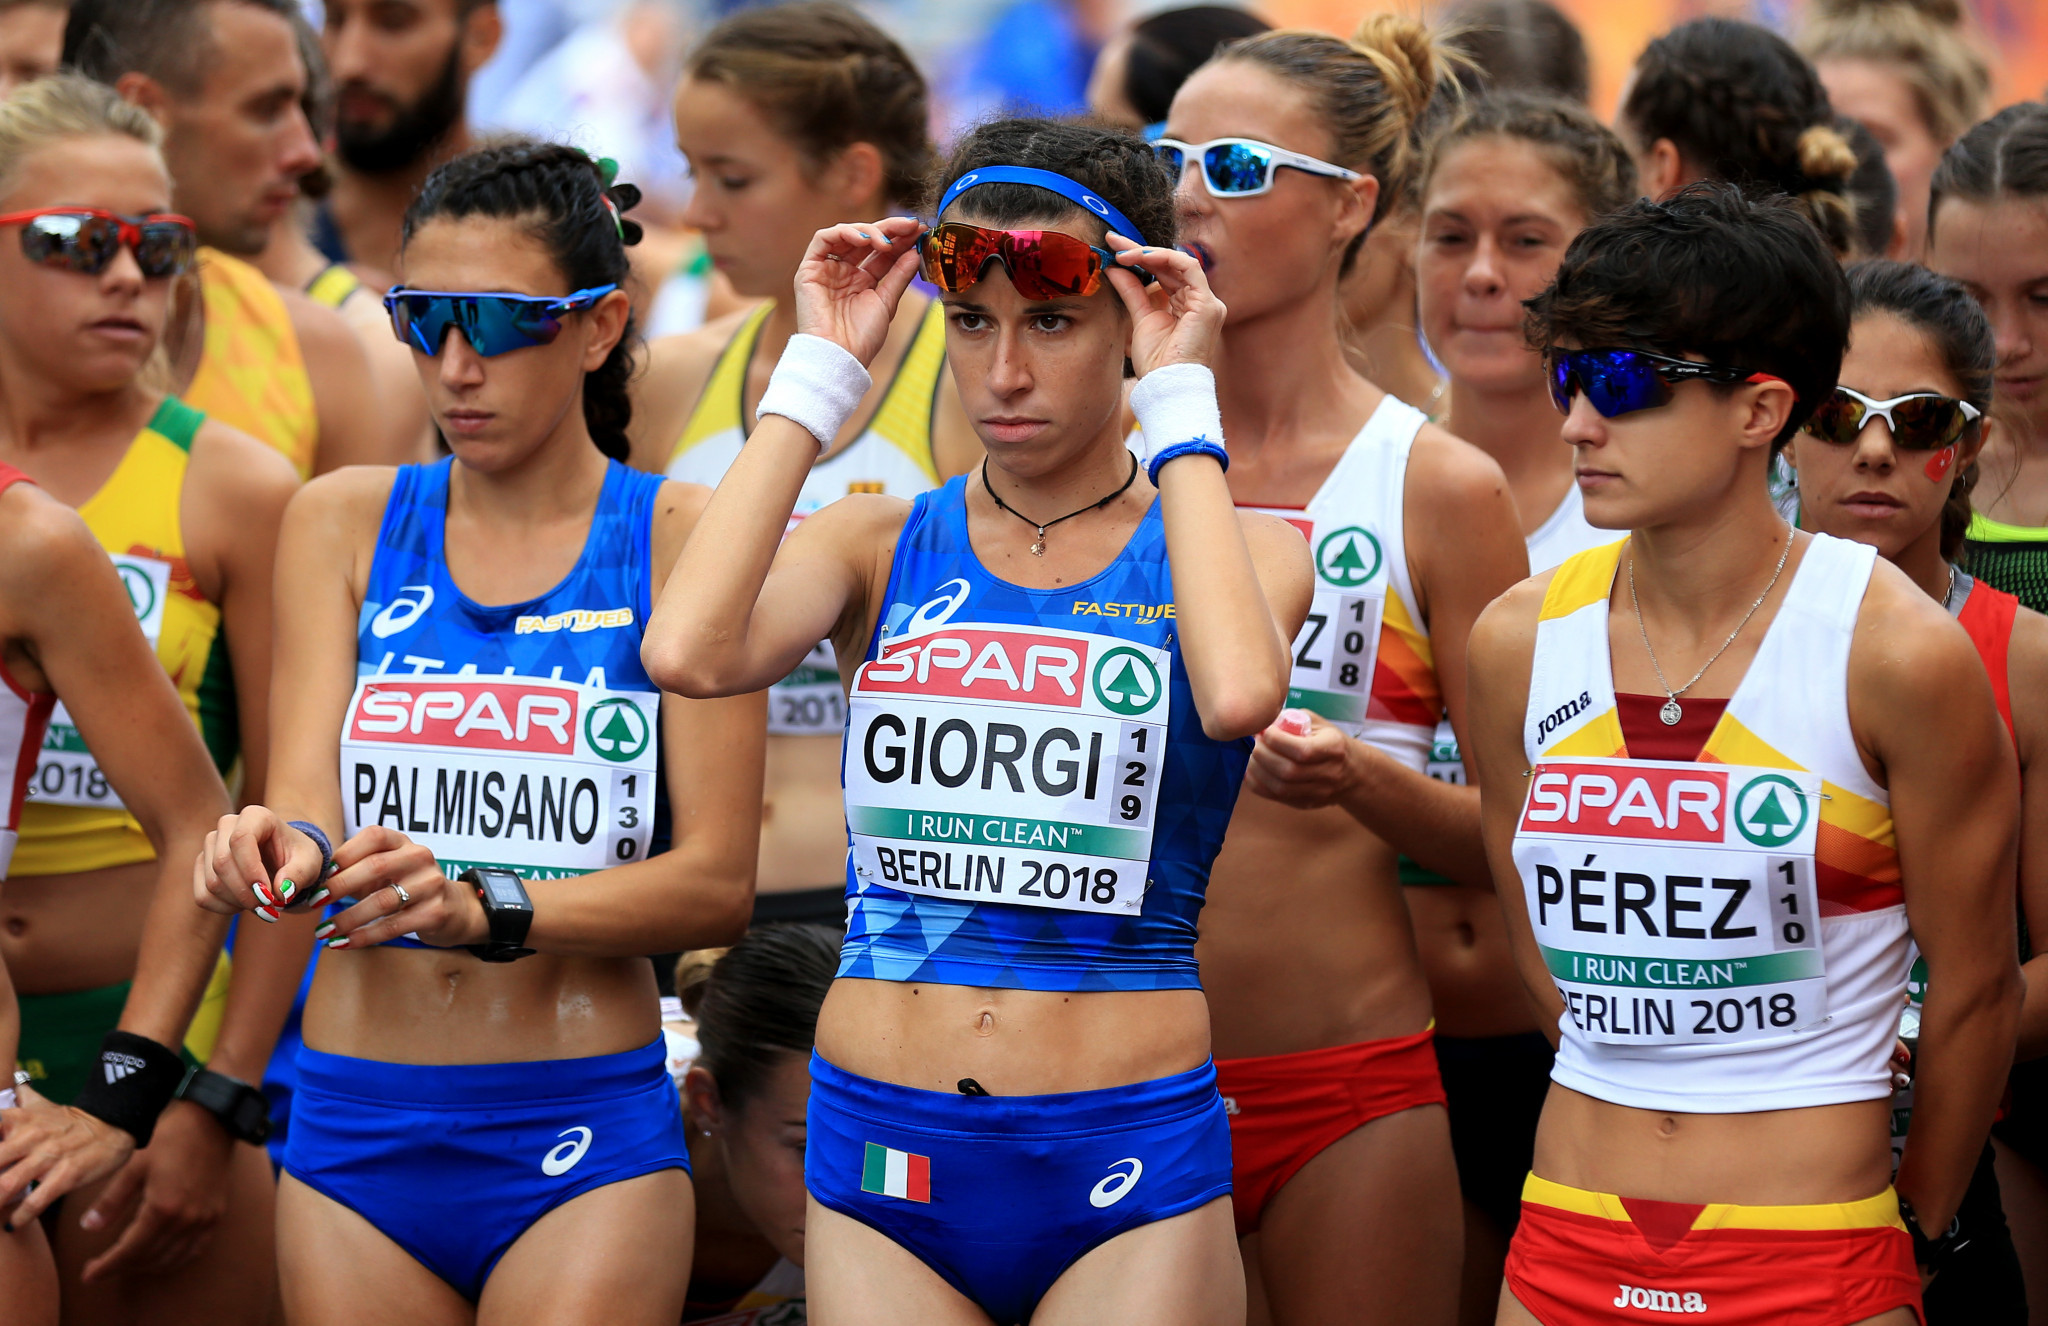  High hopes for Italy at European Race Walking Cup in Lithuania